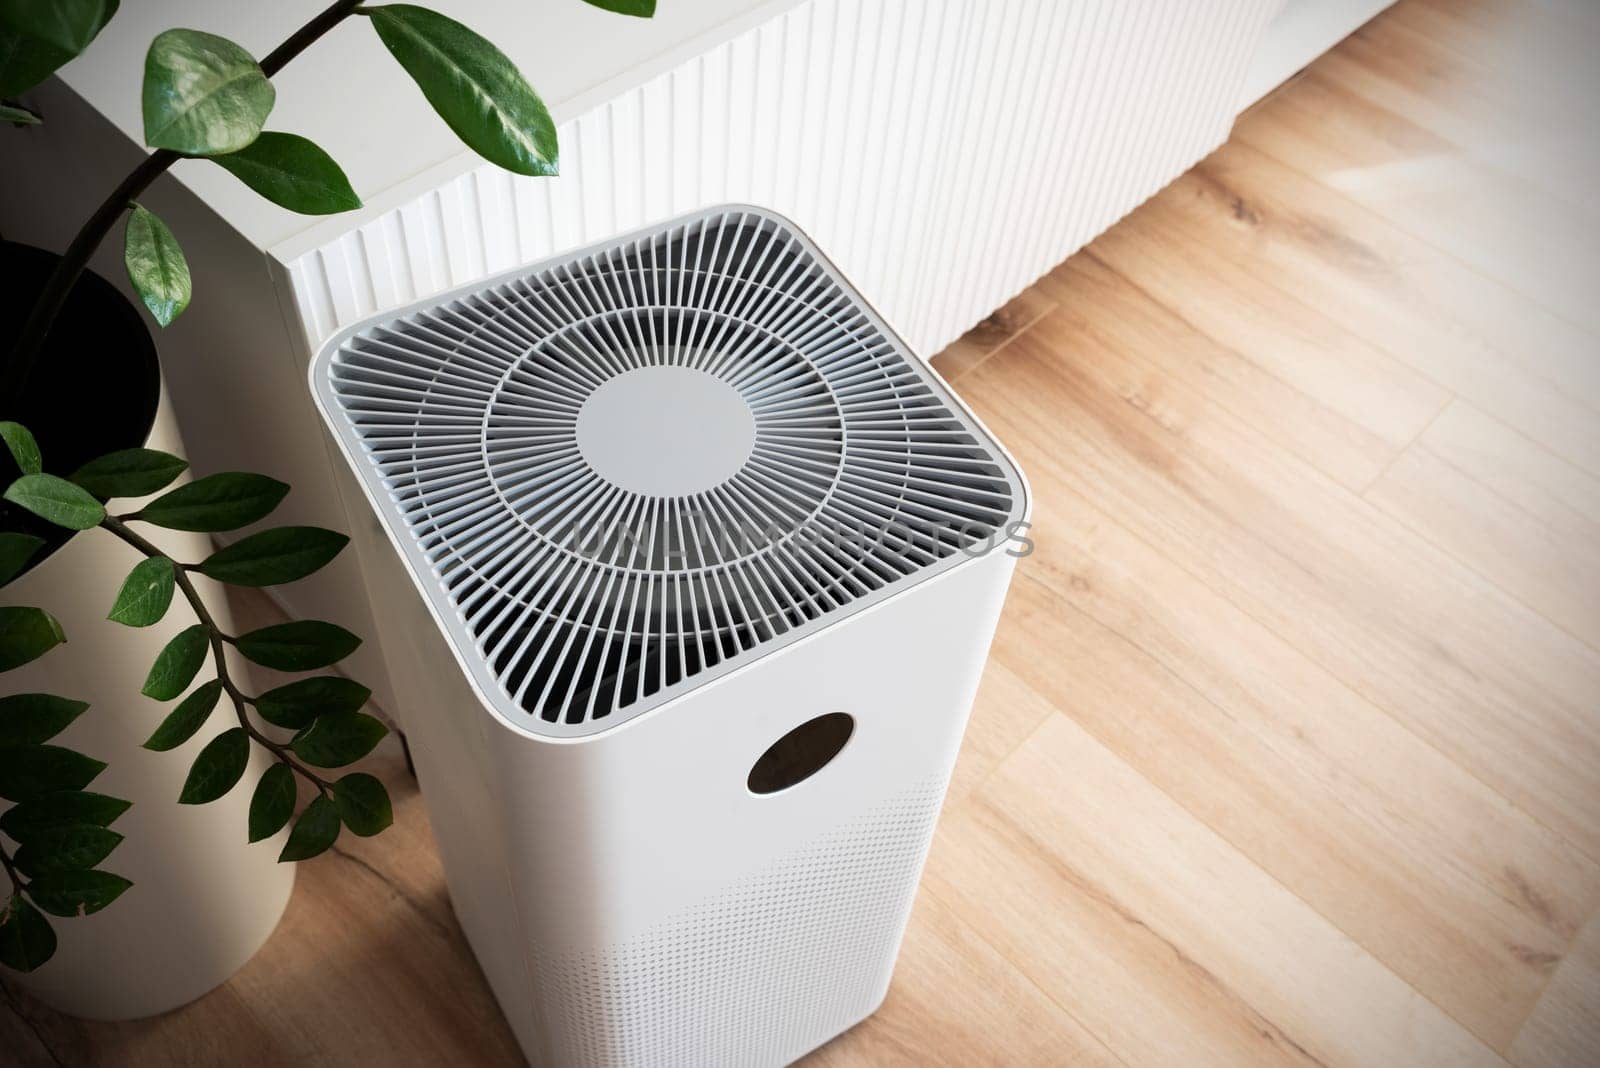 Air purifier in home. Smart home devices by simpson33